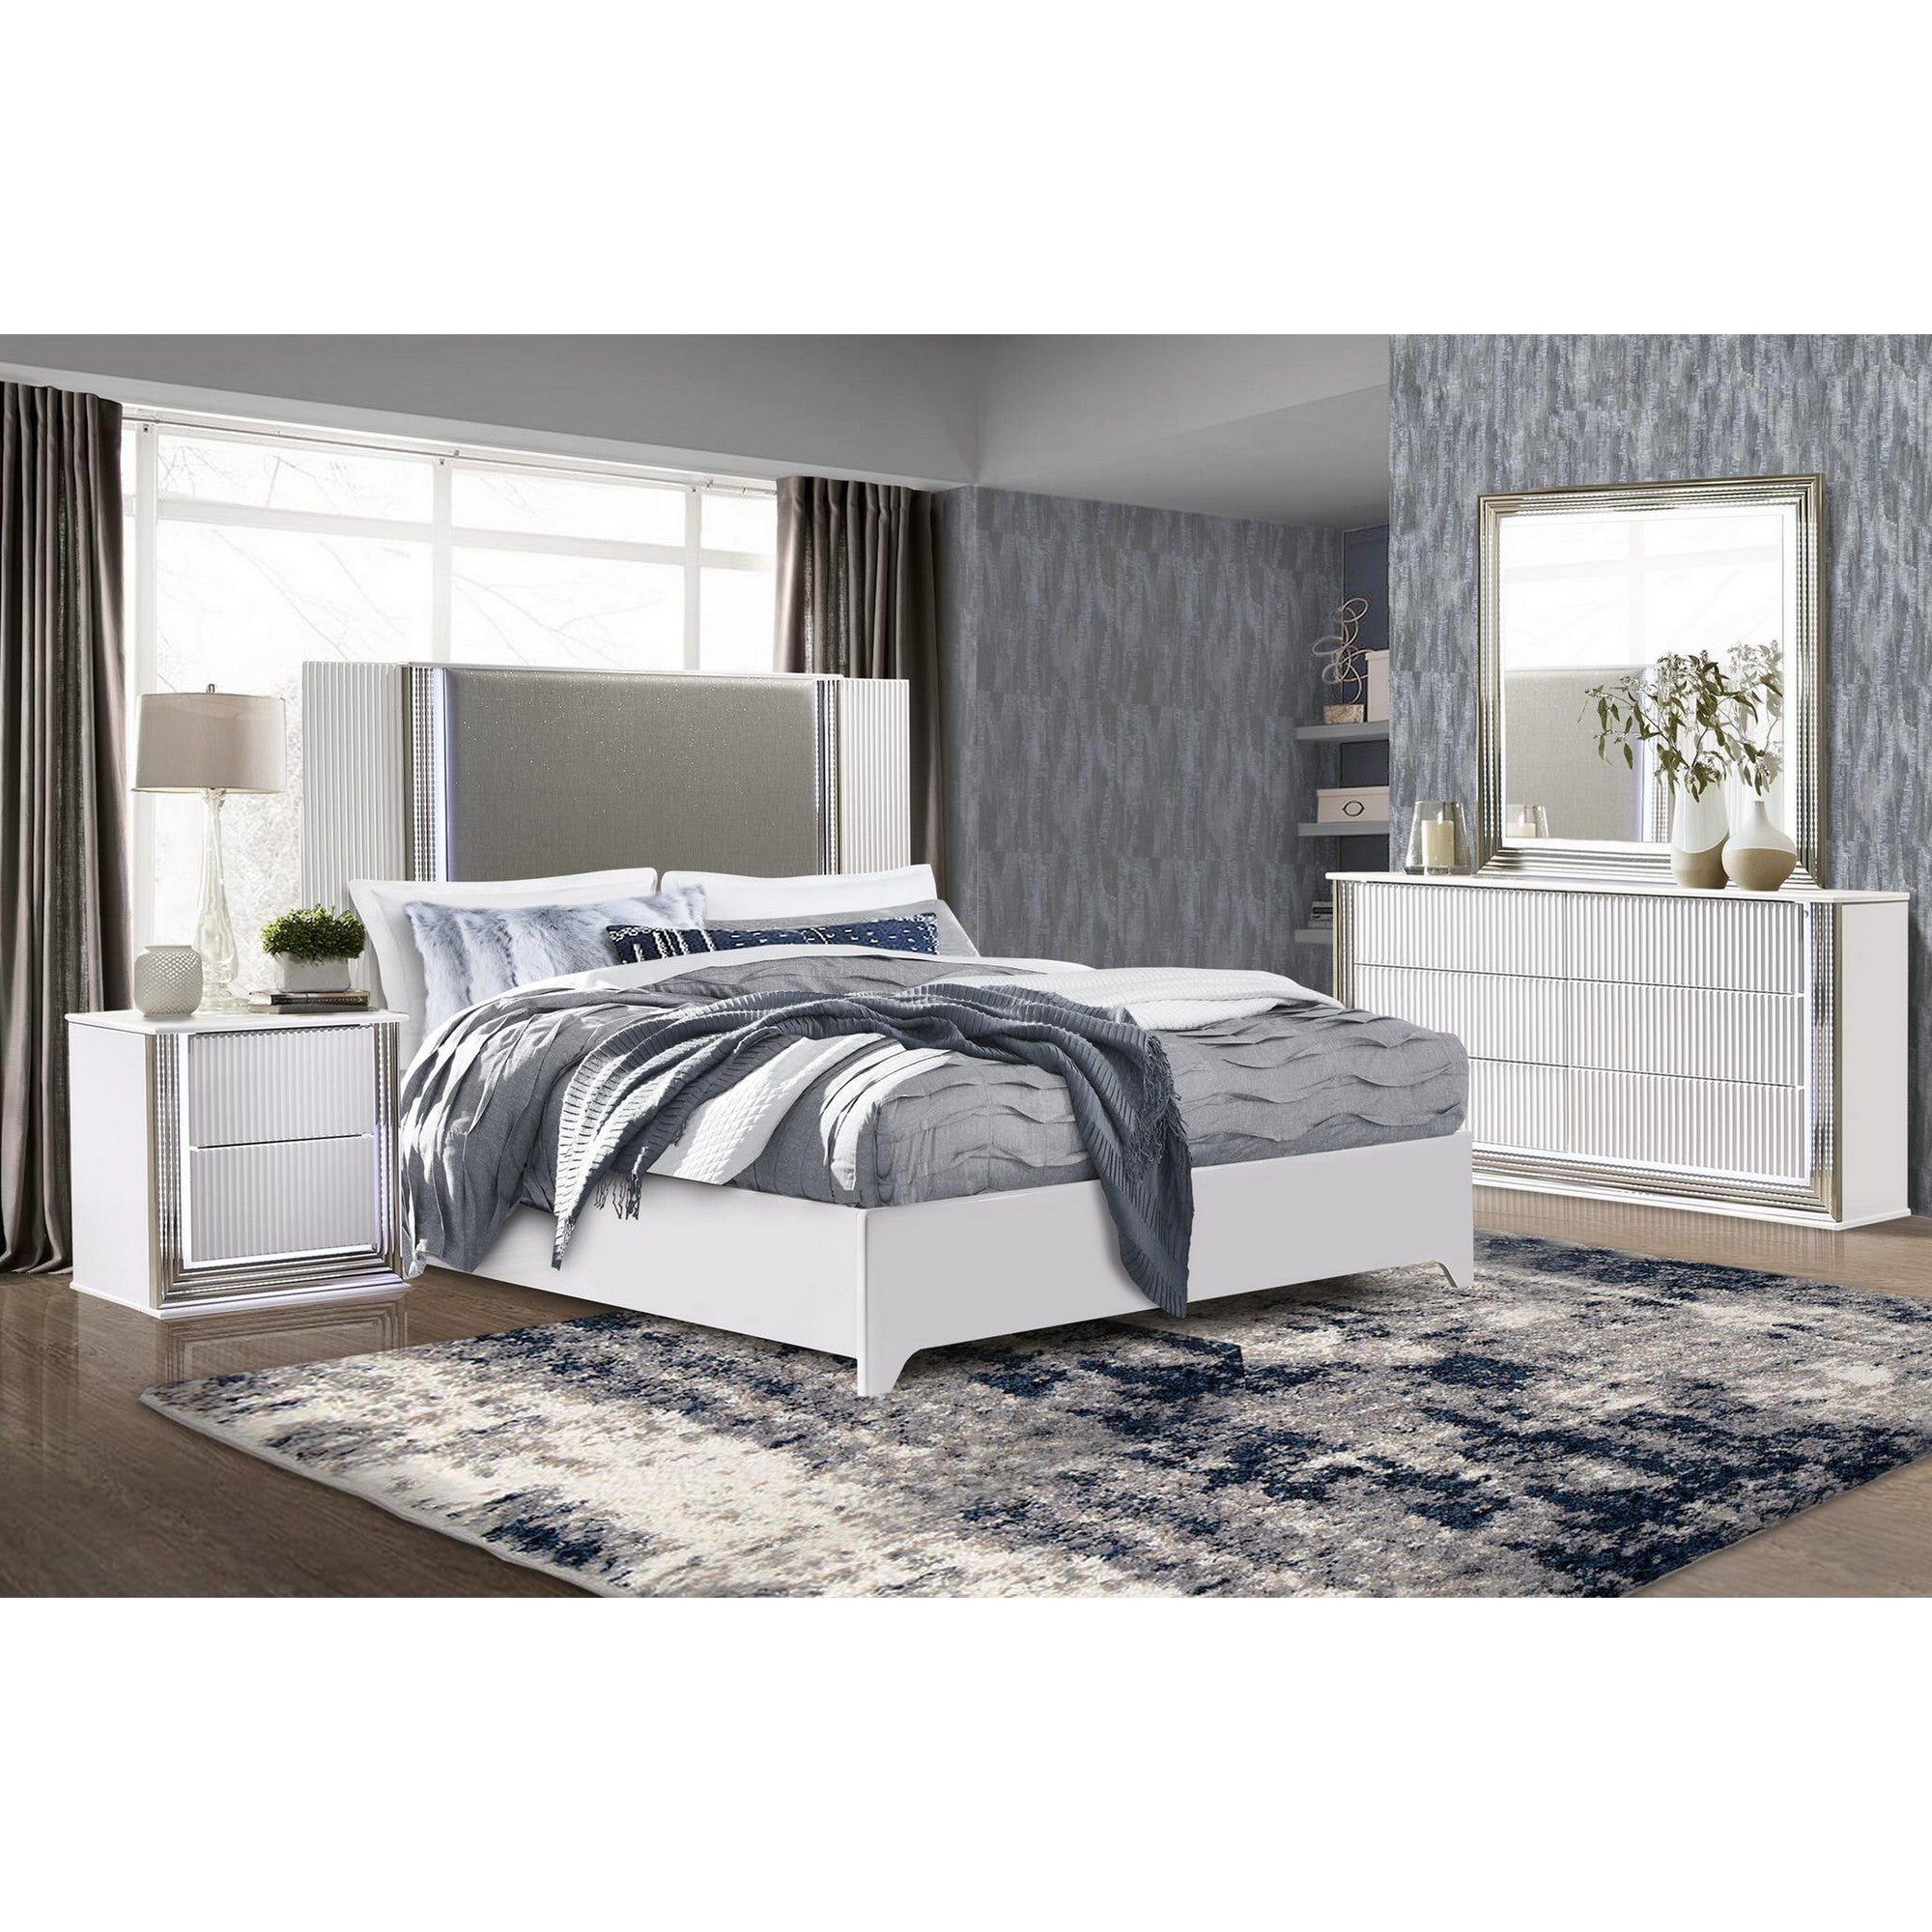 Aspen King Bed with LED Headboard, Dresser, Mirror, Nightstand